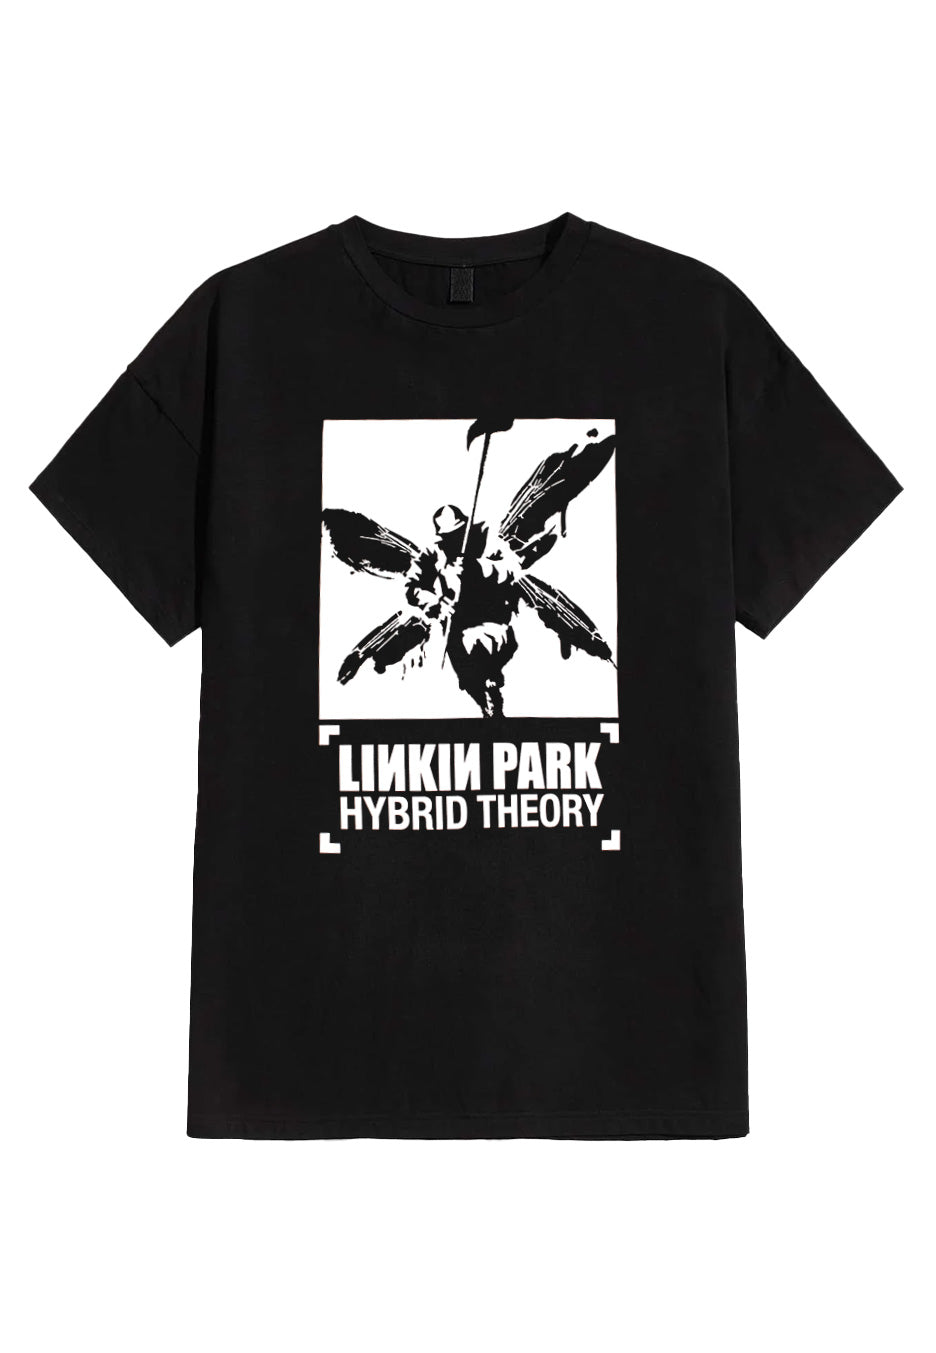 Linkin Park - Soldier Hybrid Theory - T-Shirt